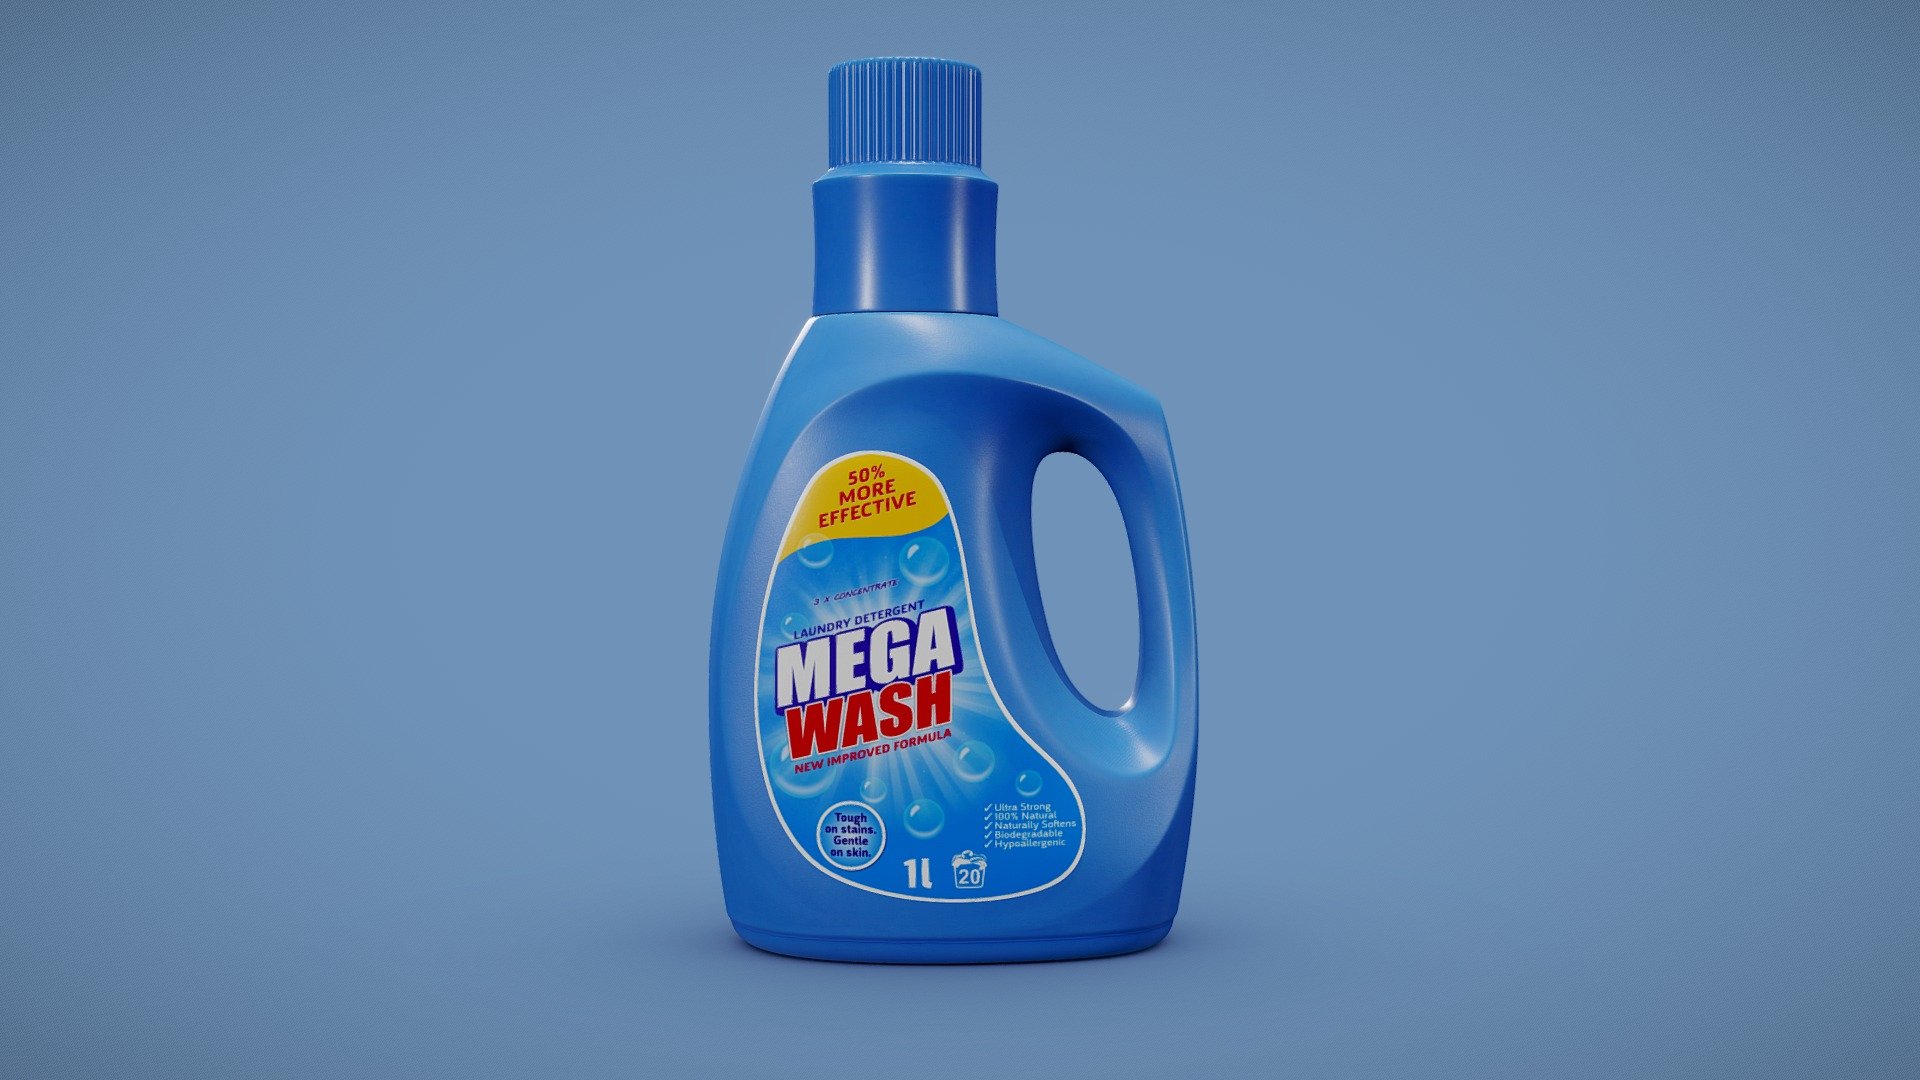 Laundry detergent bottle PBR 3D model.

Purchase includes several colour variations of bottle and label.

Bottle label is fictional, the asset is safe to use in commecrial projects 3d model